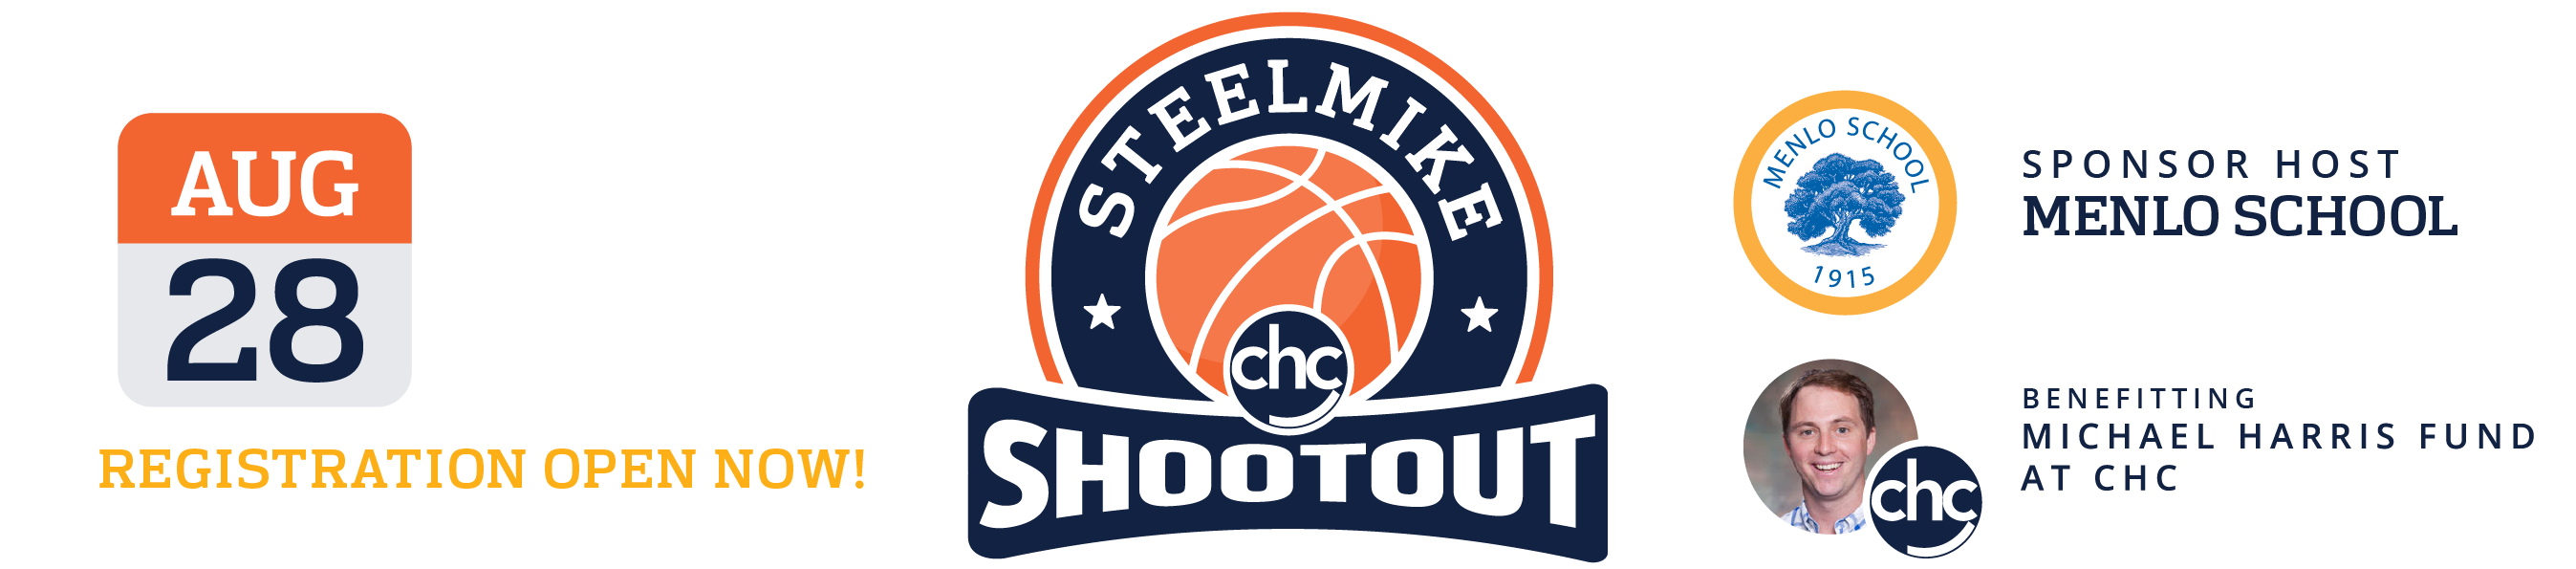 CHC SteelMike Shootout. Registration Open Now! Sponsor Host: Menlo School. Aug 28. 3-on-3 Basketball Tournament Presented by CHC. Tip-Off: 9:00AM. Benefitting Michael Harris Fund at CHC.